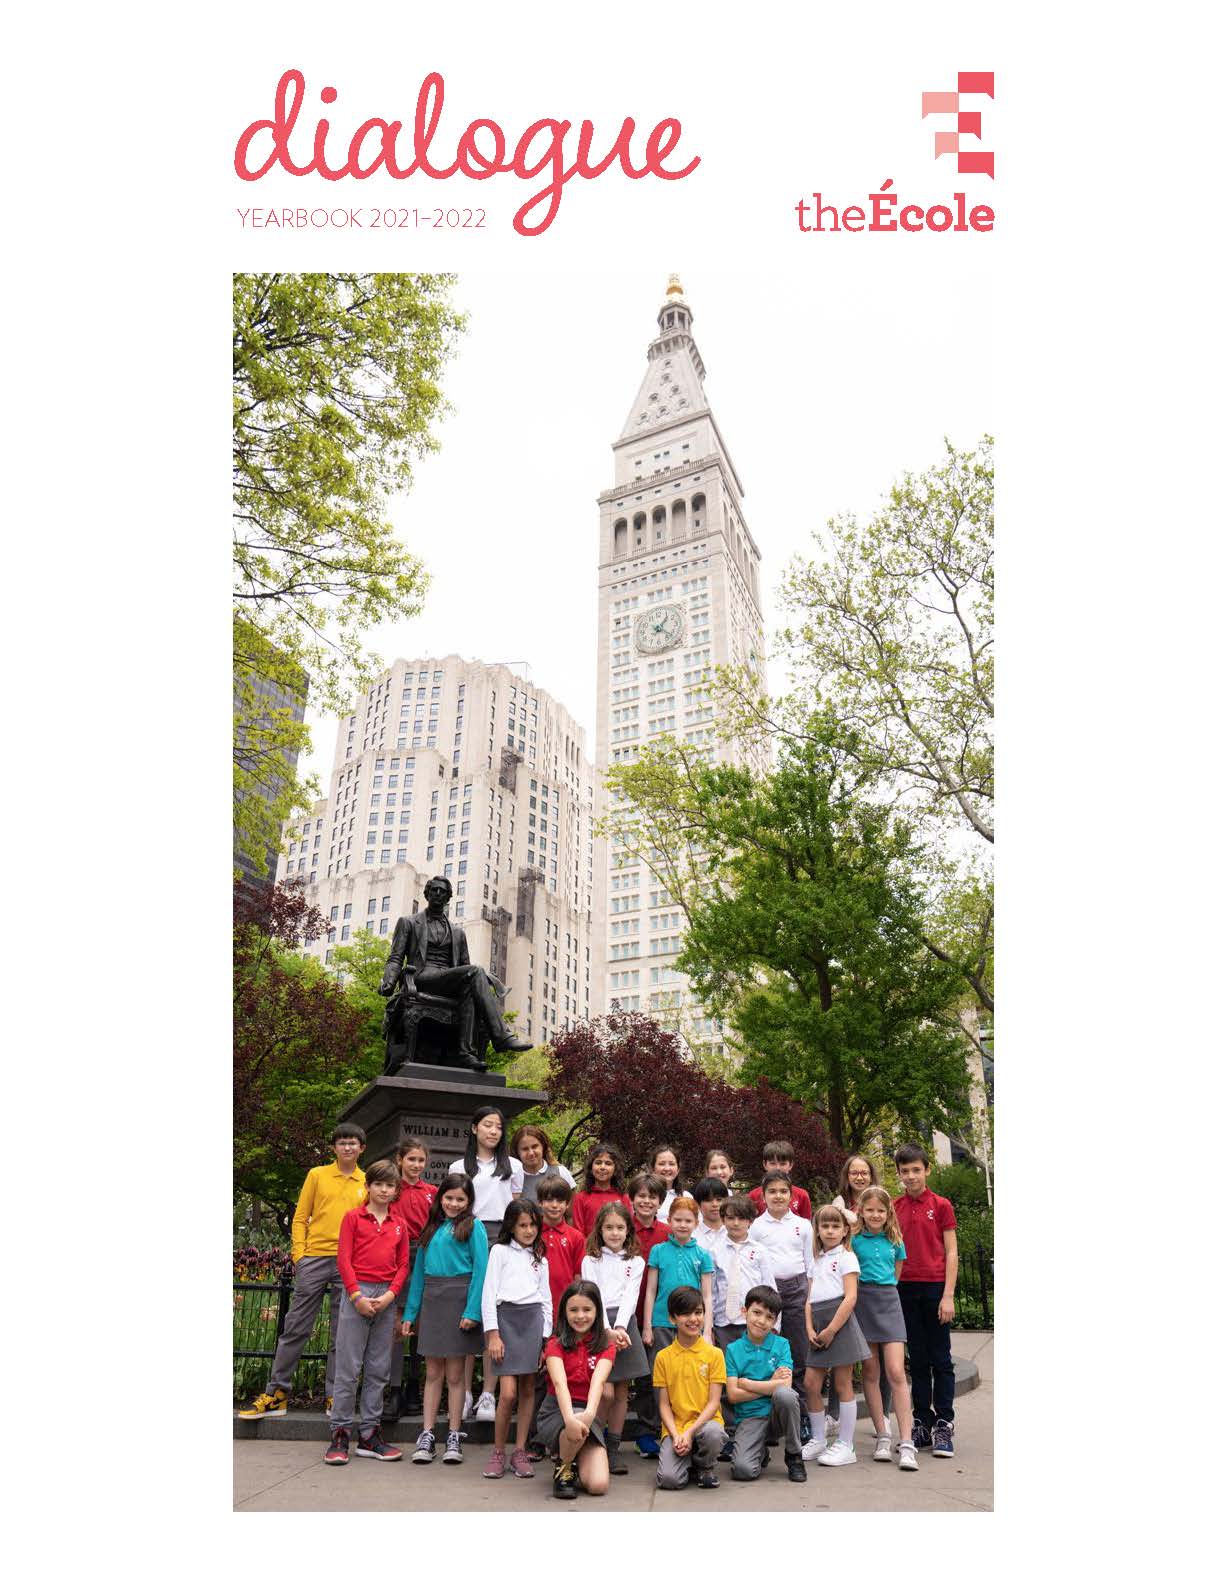 The École 2022 Yearbook